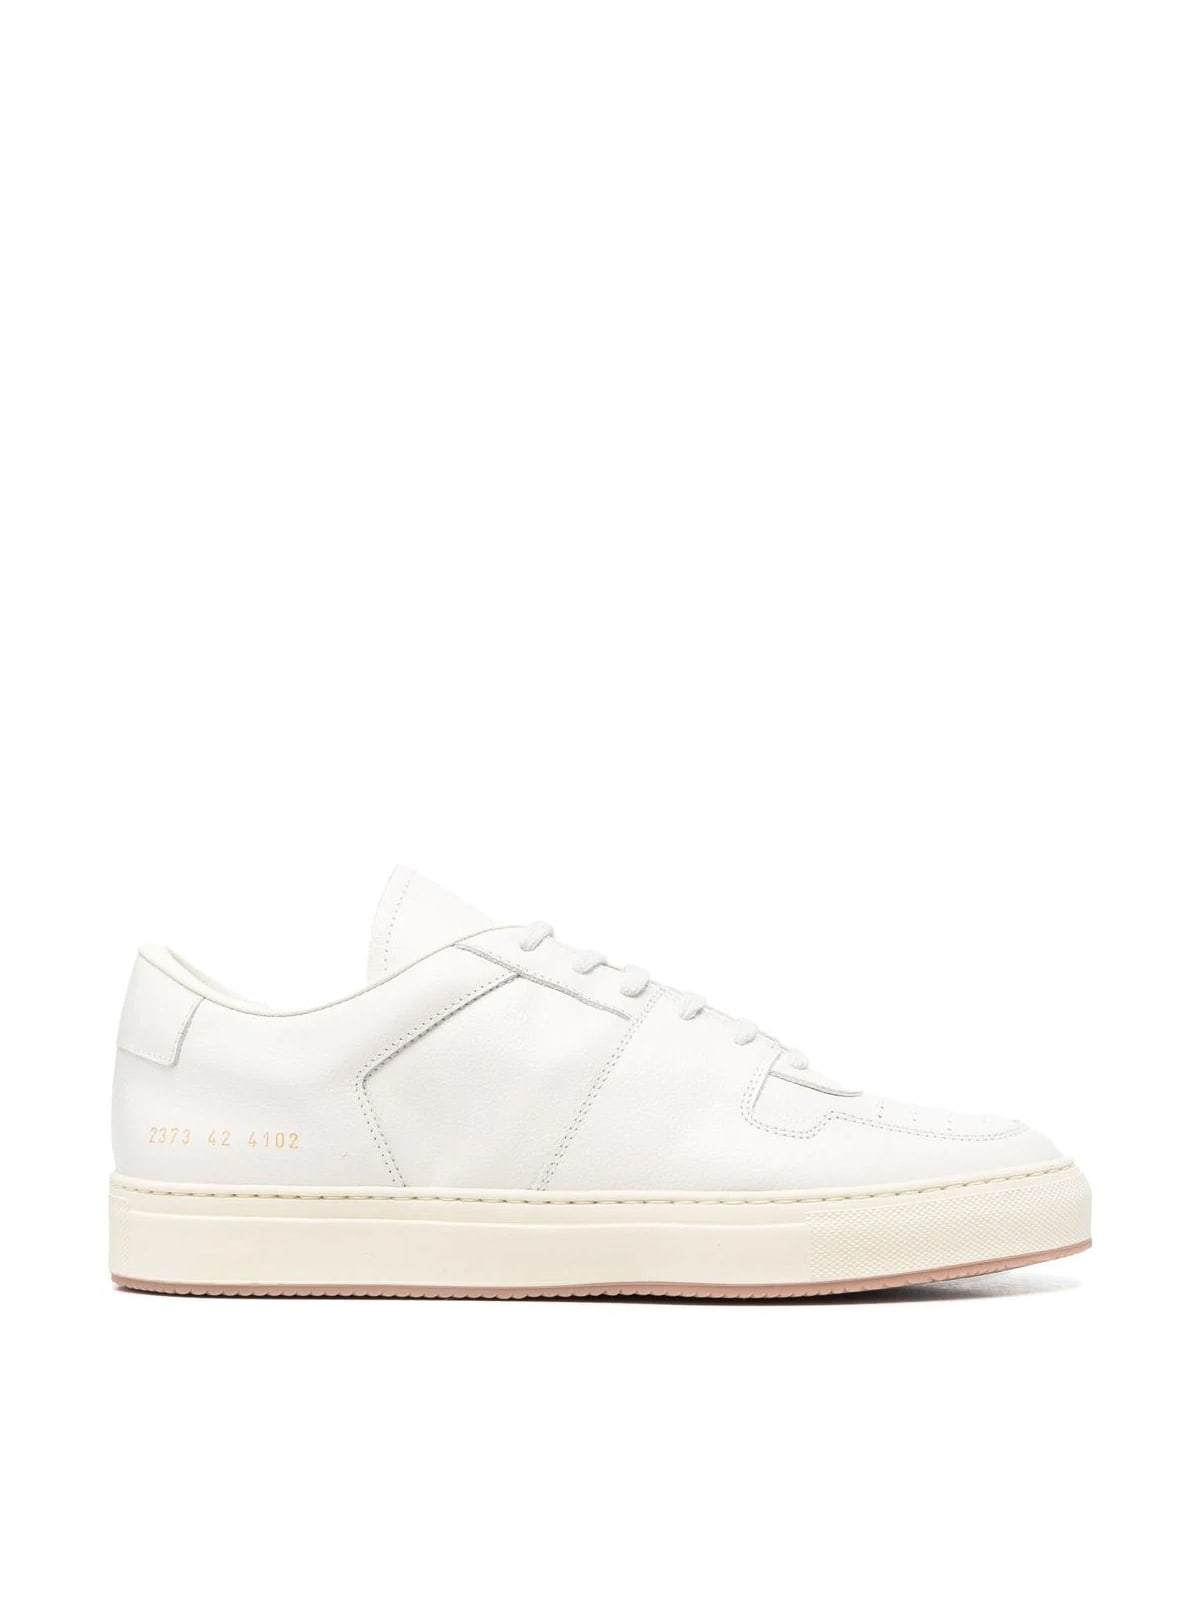 Common Projects 2373 Decades Low Sneakers